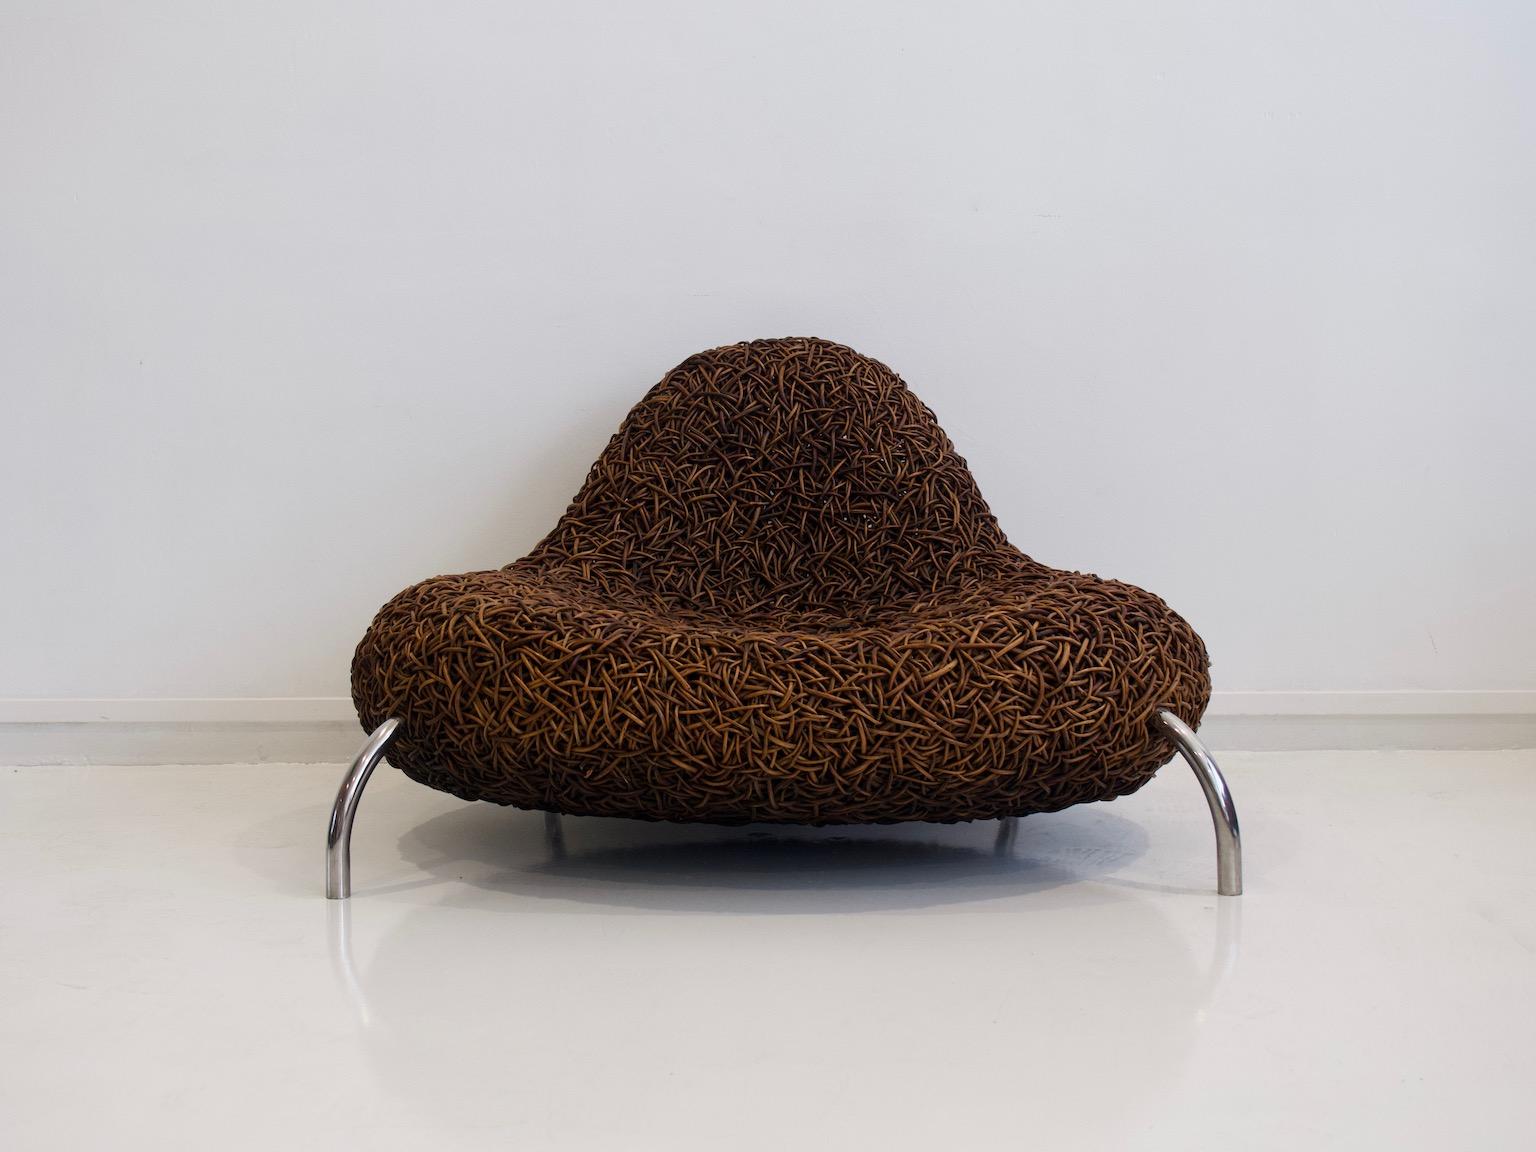 Lounge chair made of wicker with chromed metal feet by Udom Udomsrianan of Planet, 2001. The chair was an award winner at the Milan Furniture Fair in 2003. Comfortable to sit on, a statement piece for your home.